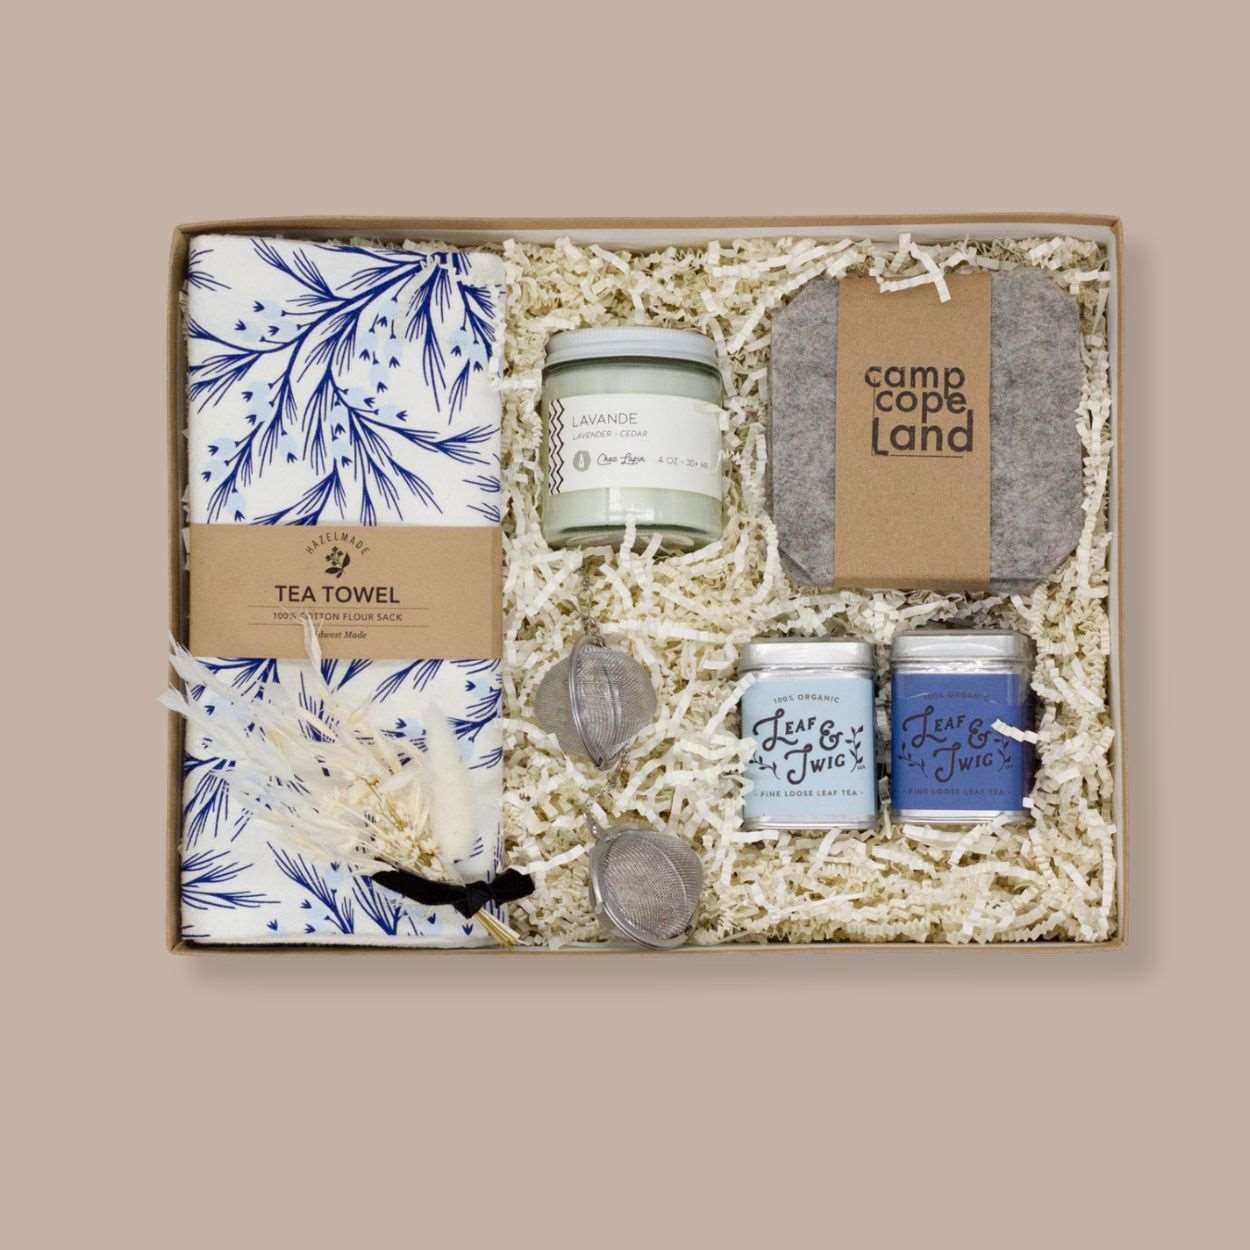 Cozy Blue Gift Box - KINSHIP GIFT - Housewarming Gift - KINSHIP GIFT - housewarming, housewarming gift, Warm & cozy - Pittsburgh - gift - boxes - gift - baskets - corporate - gifts - holiday - gifts